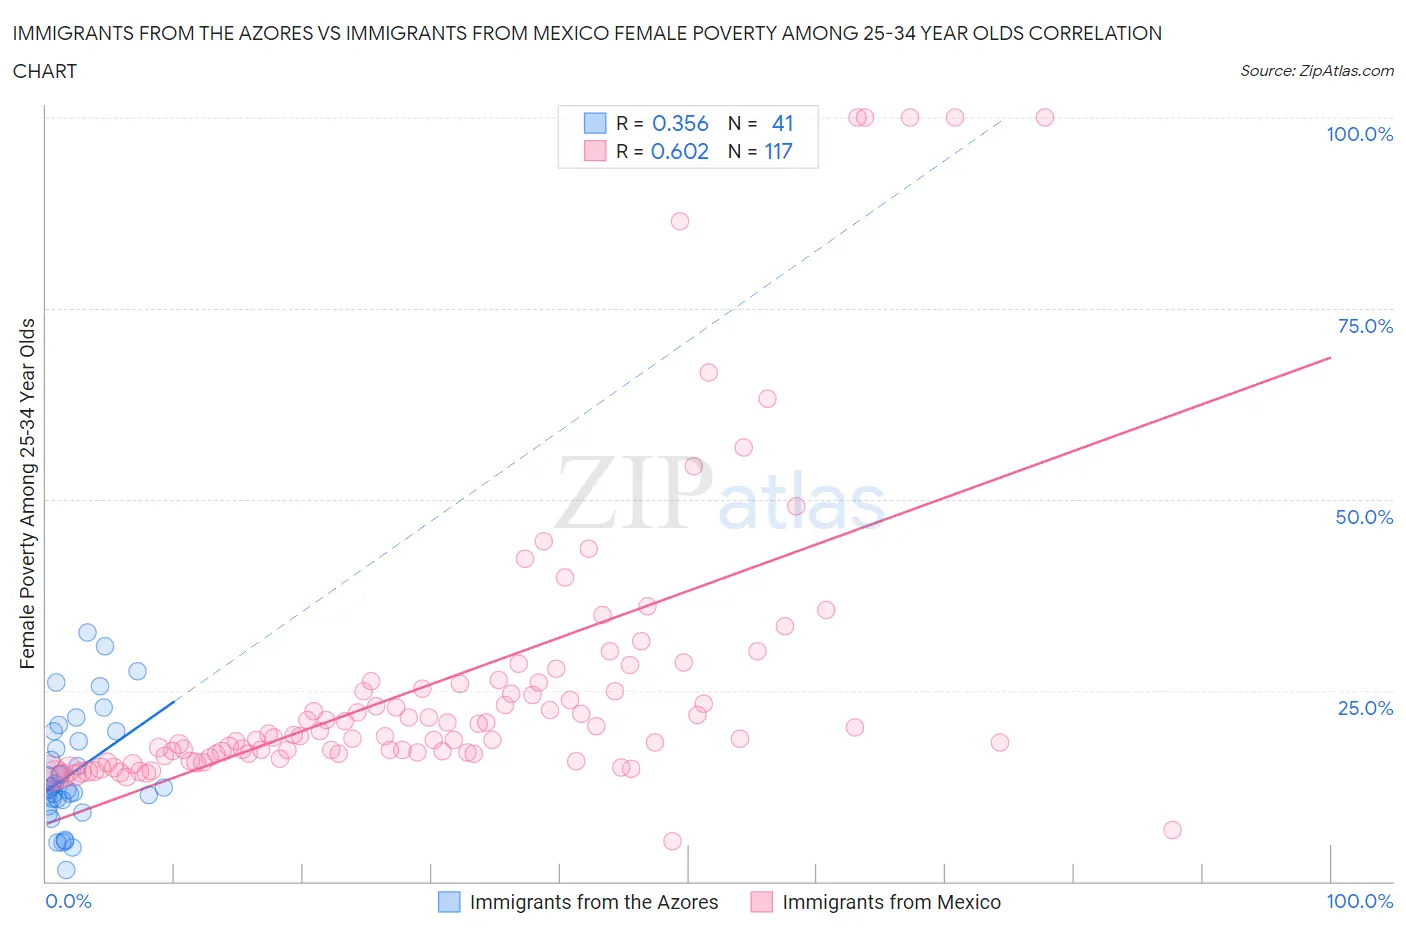 Immigrants from the Azores vs Immigrants from Mexico Female Poverty Among 25-34 Year Olds